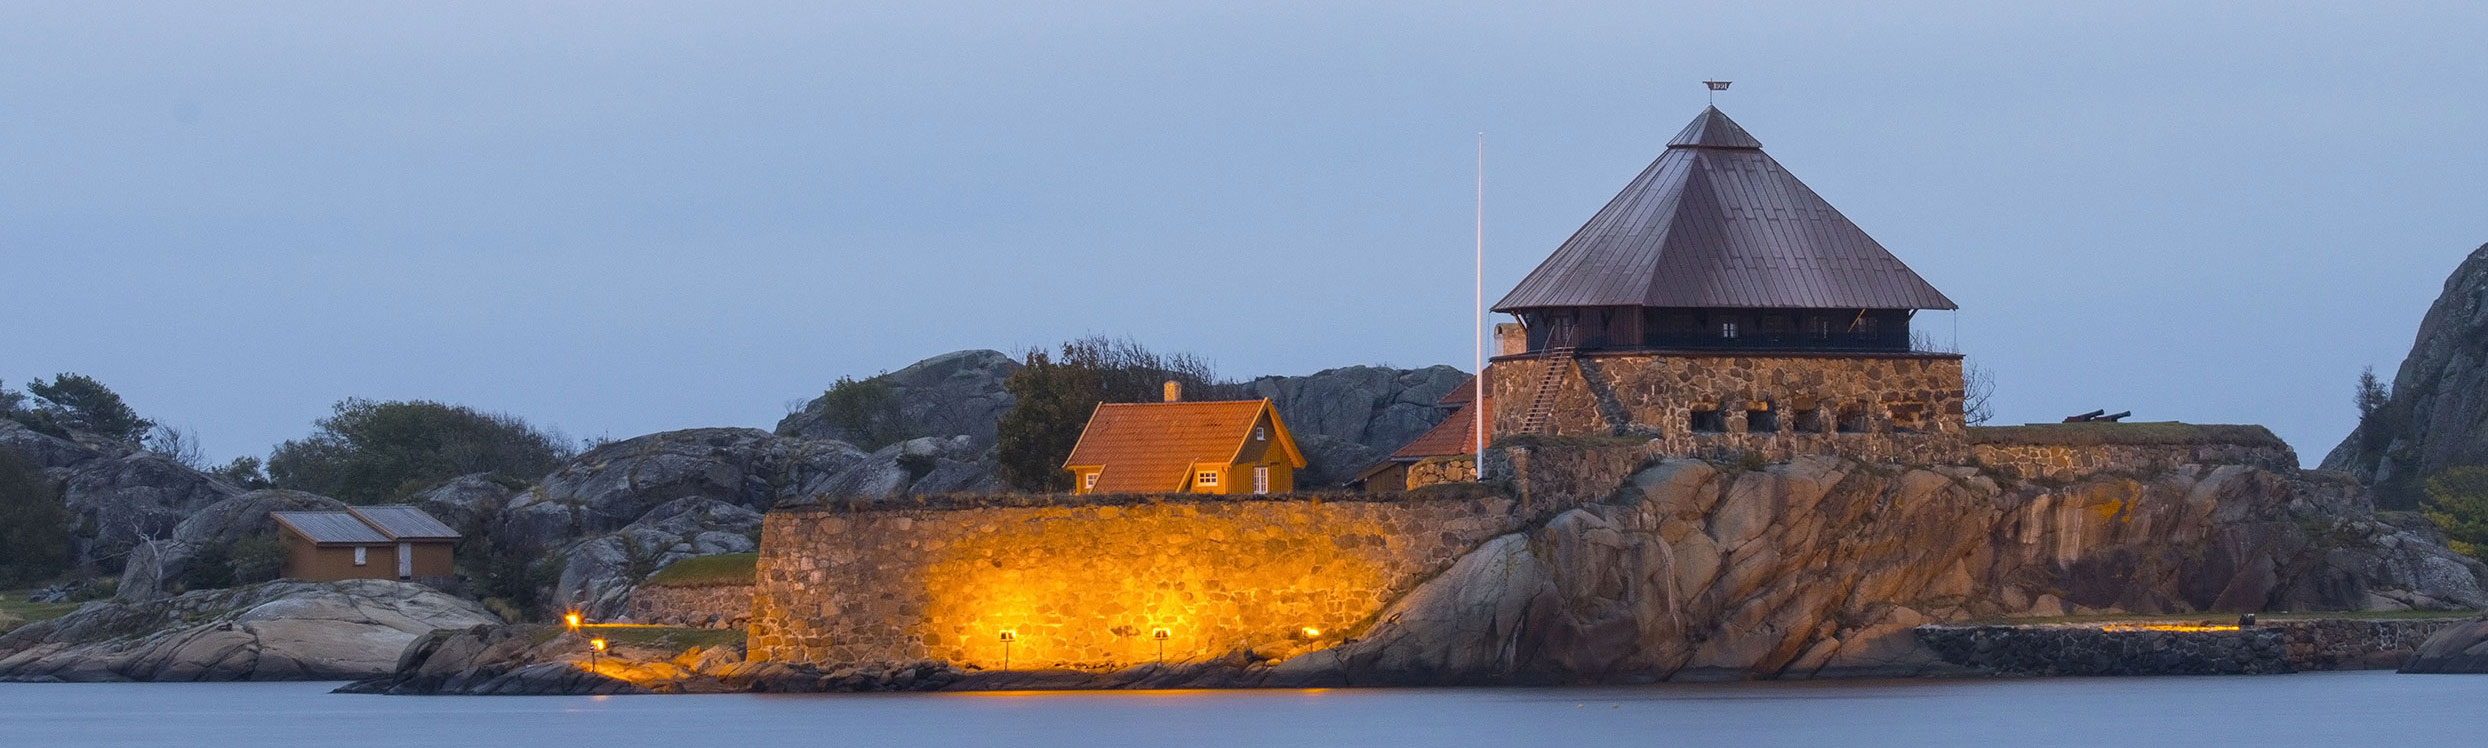 Featured image for “Stavern Fortress”